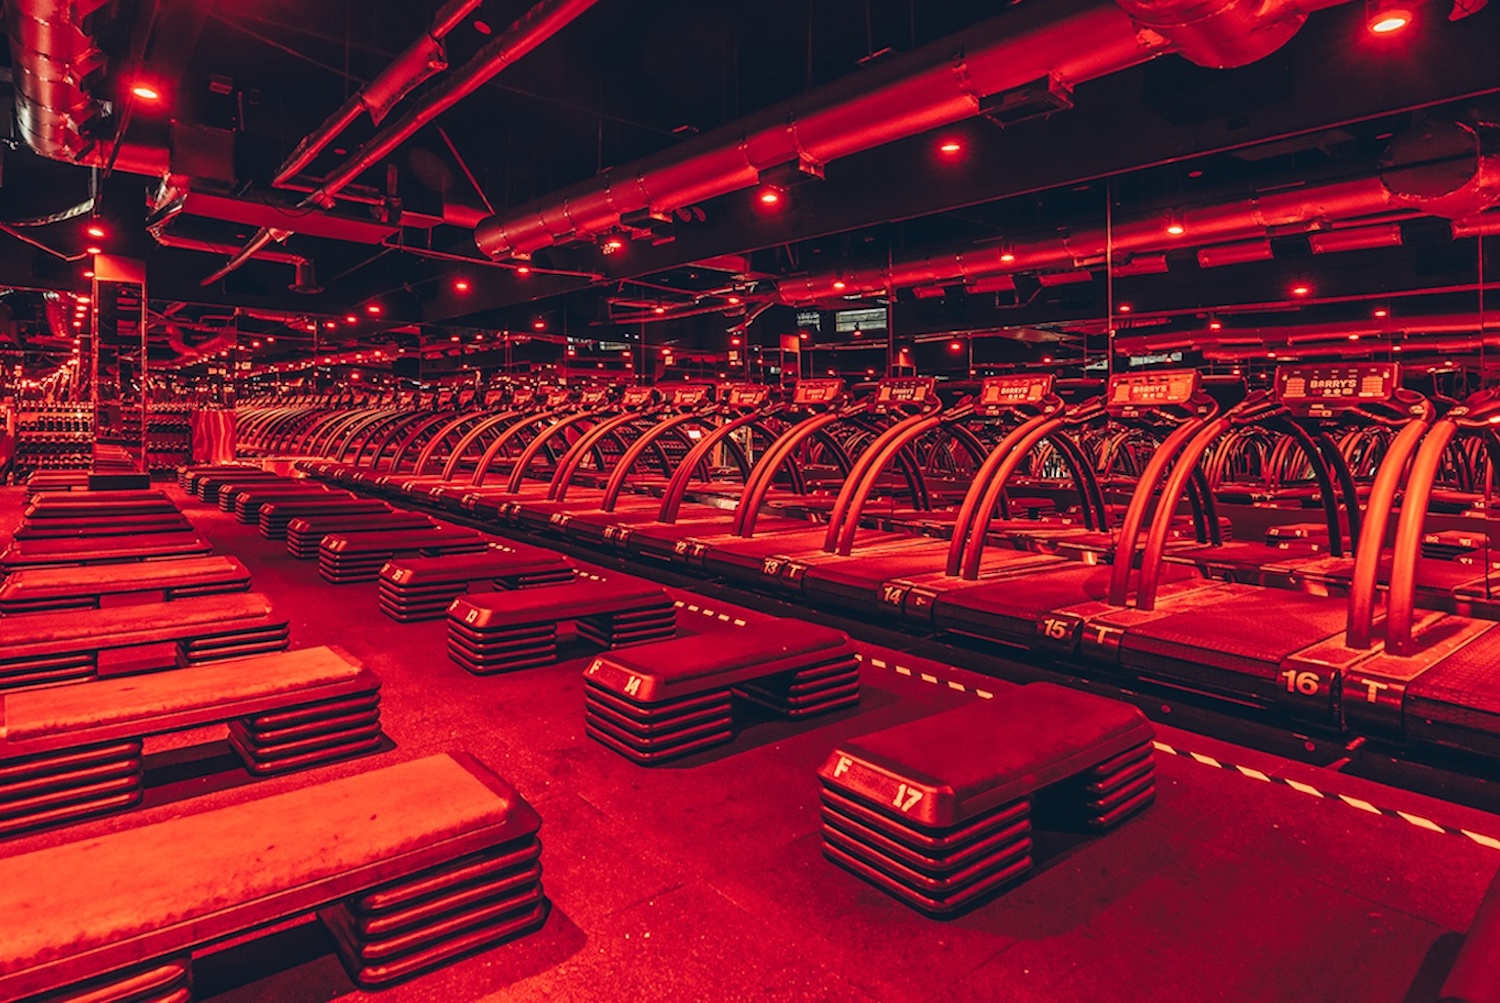 Interior of Barry's with treadmills and other workout equipment in mirrored room with dim red lights 